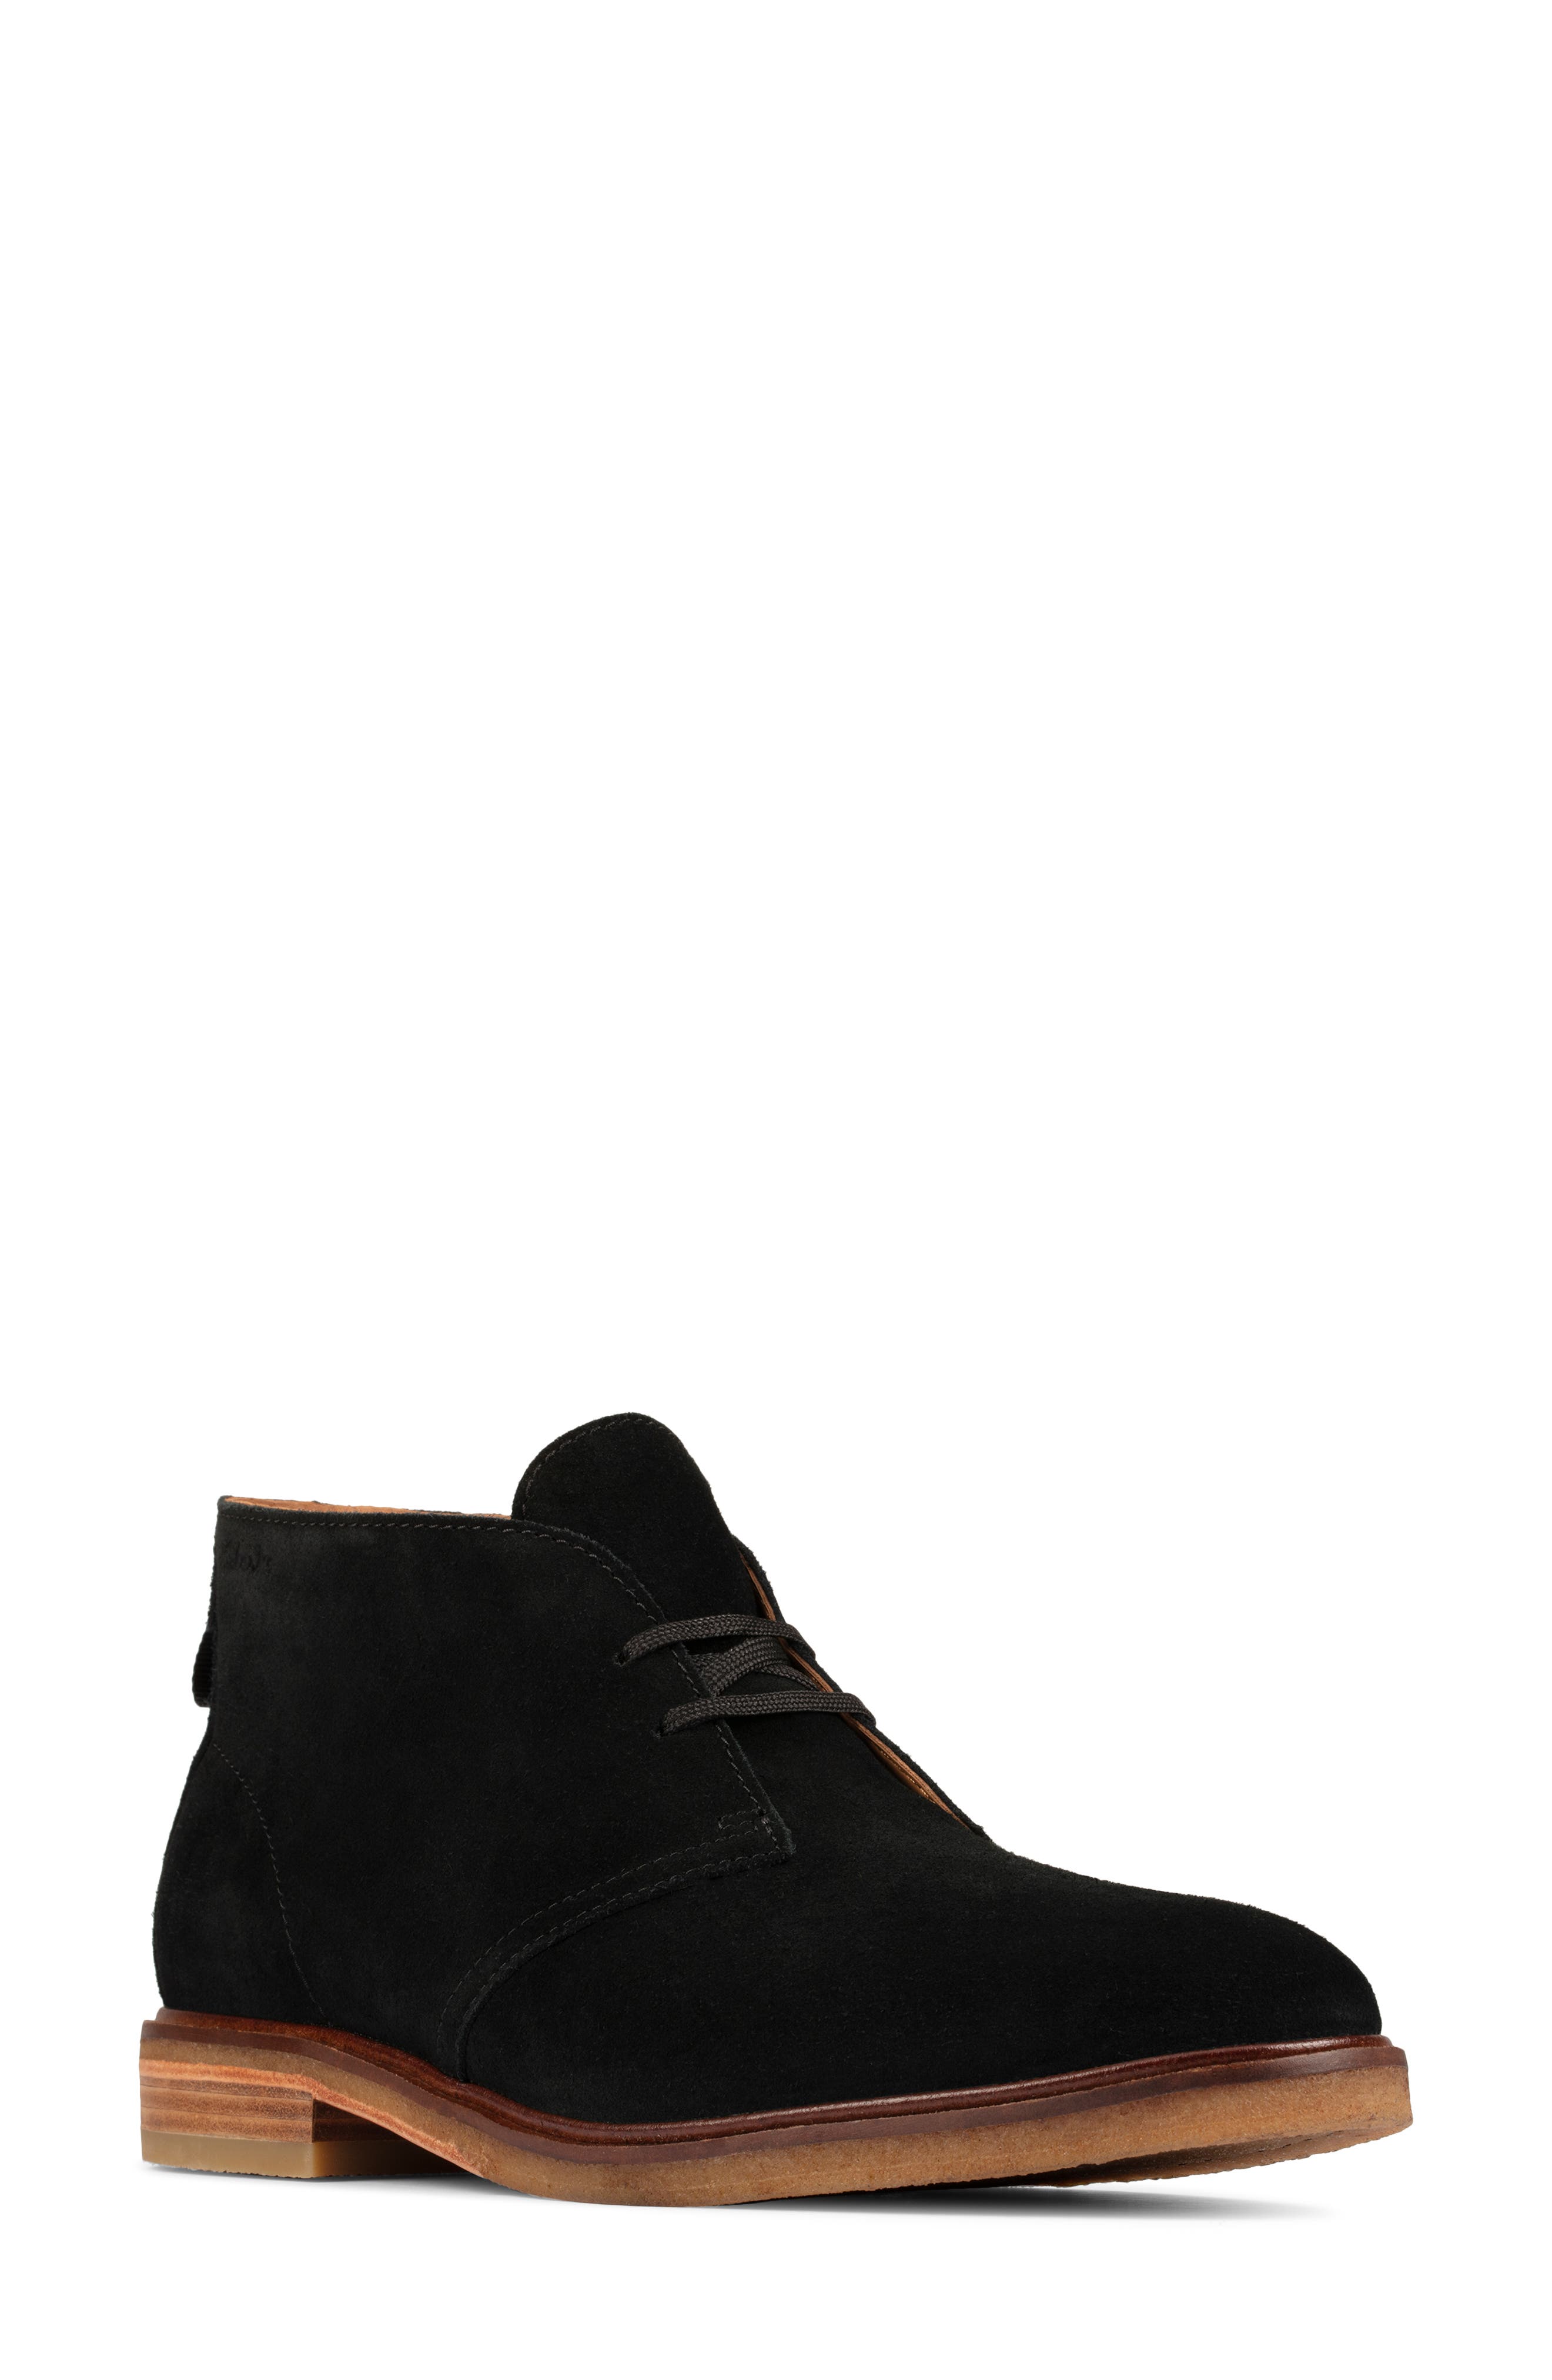 mens clarks shoes clearance